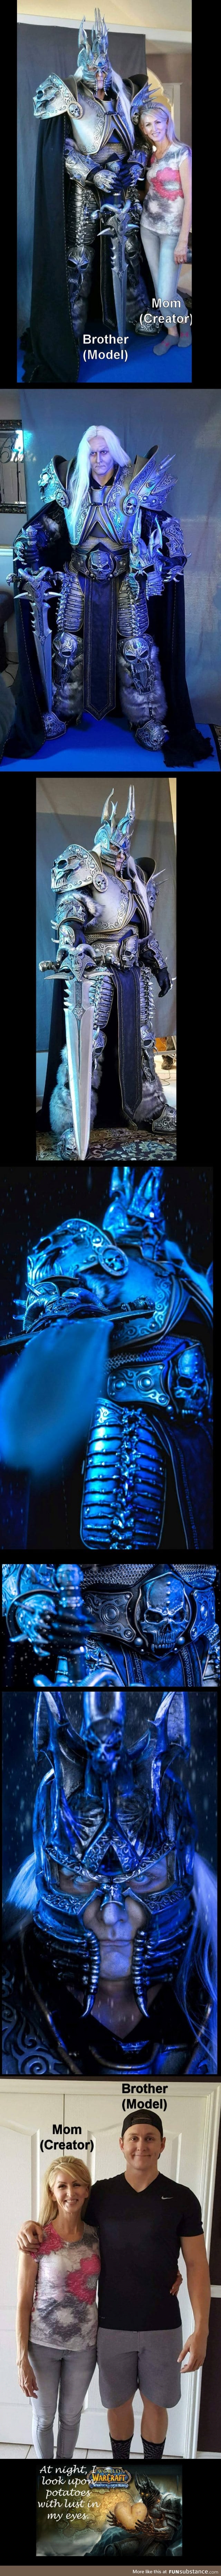 Lich King Cosplay